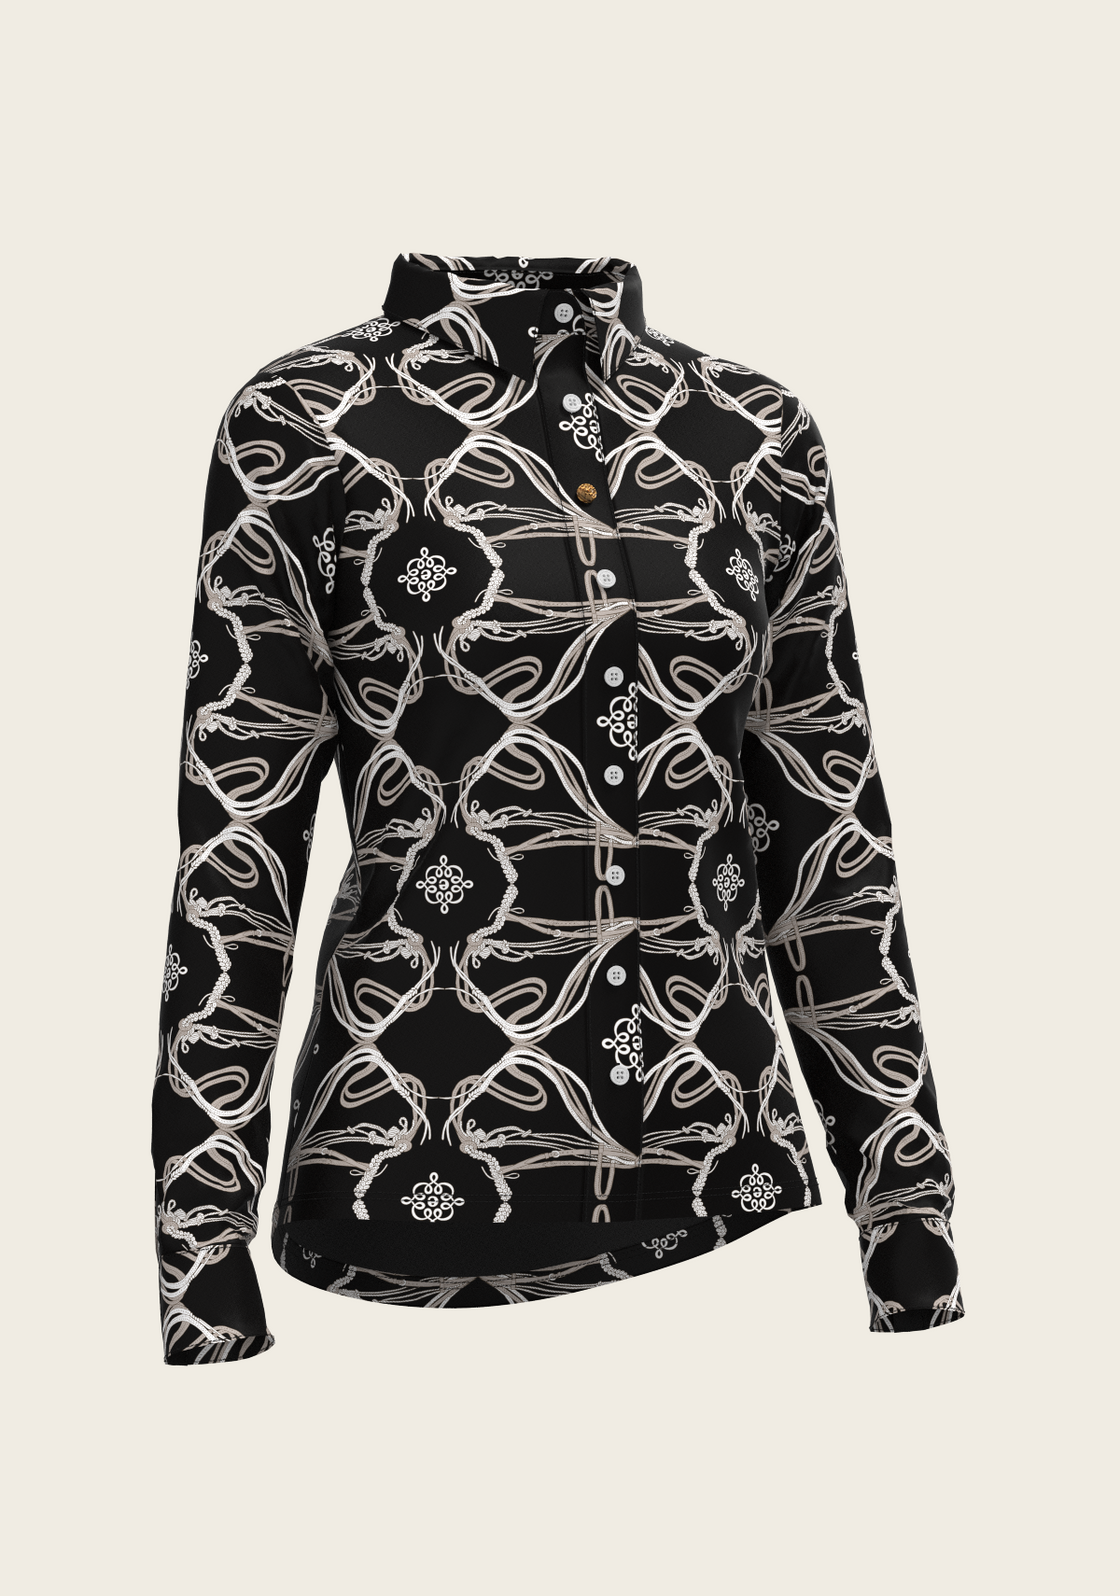 Roped Bridles on Black Ladies Button Shirt